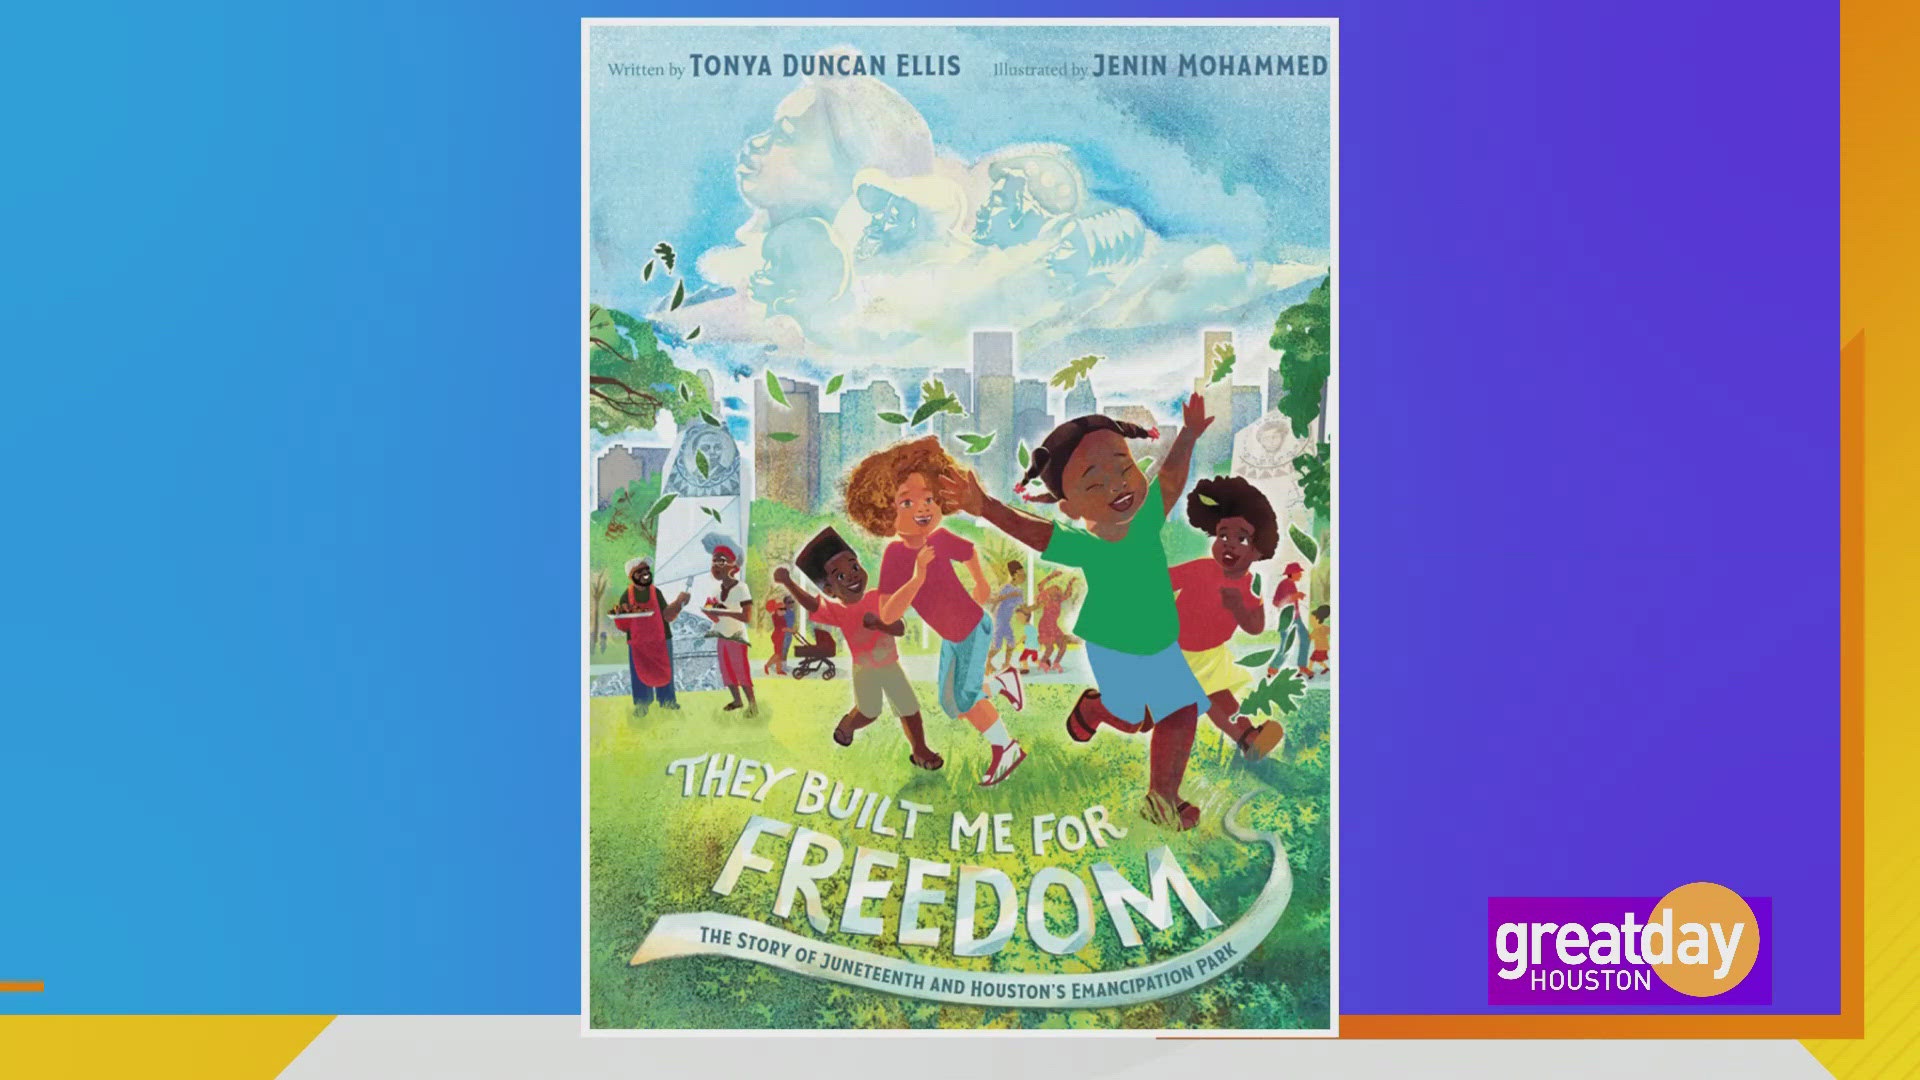 "They Built Me for Freedom" is a moving picture book about the history of Emancipation Park and the origins of Juneteenth.